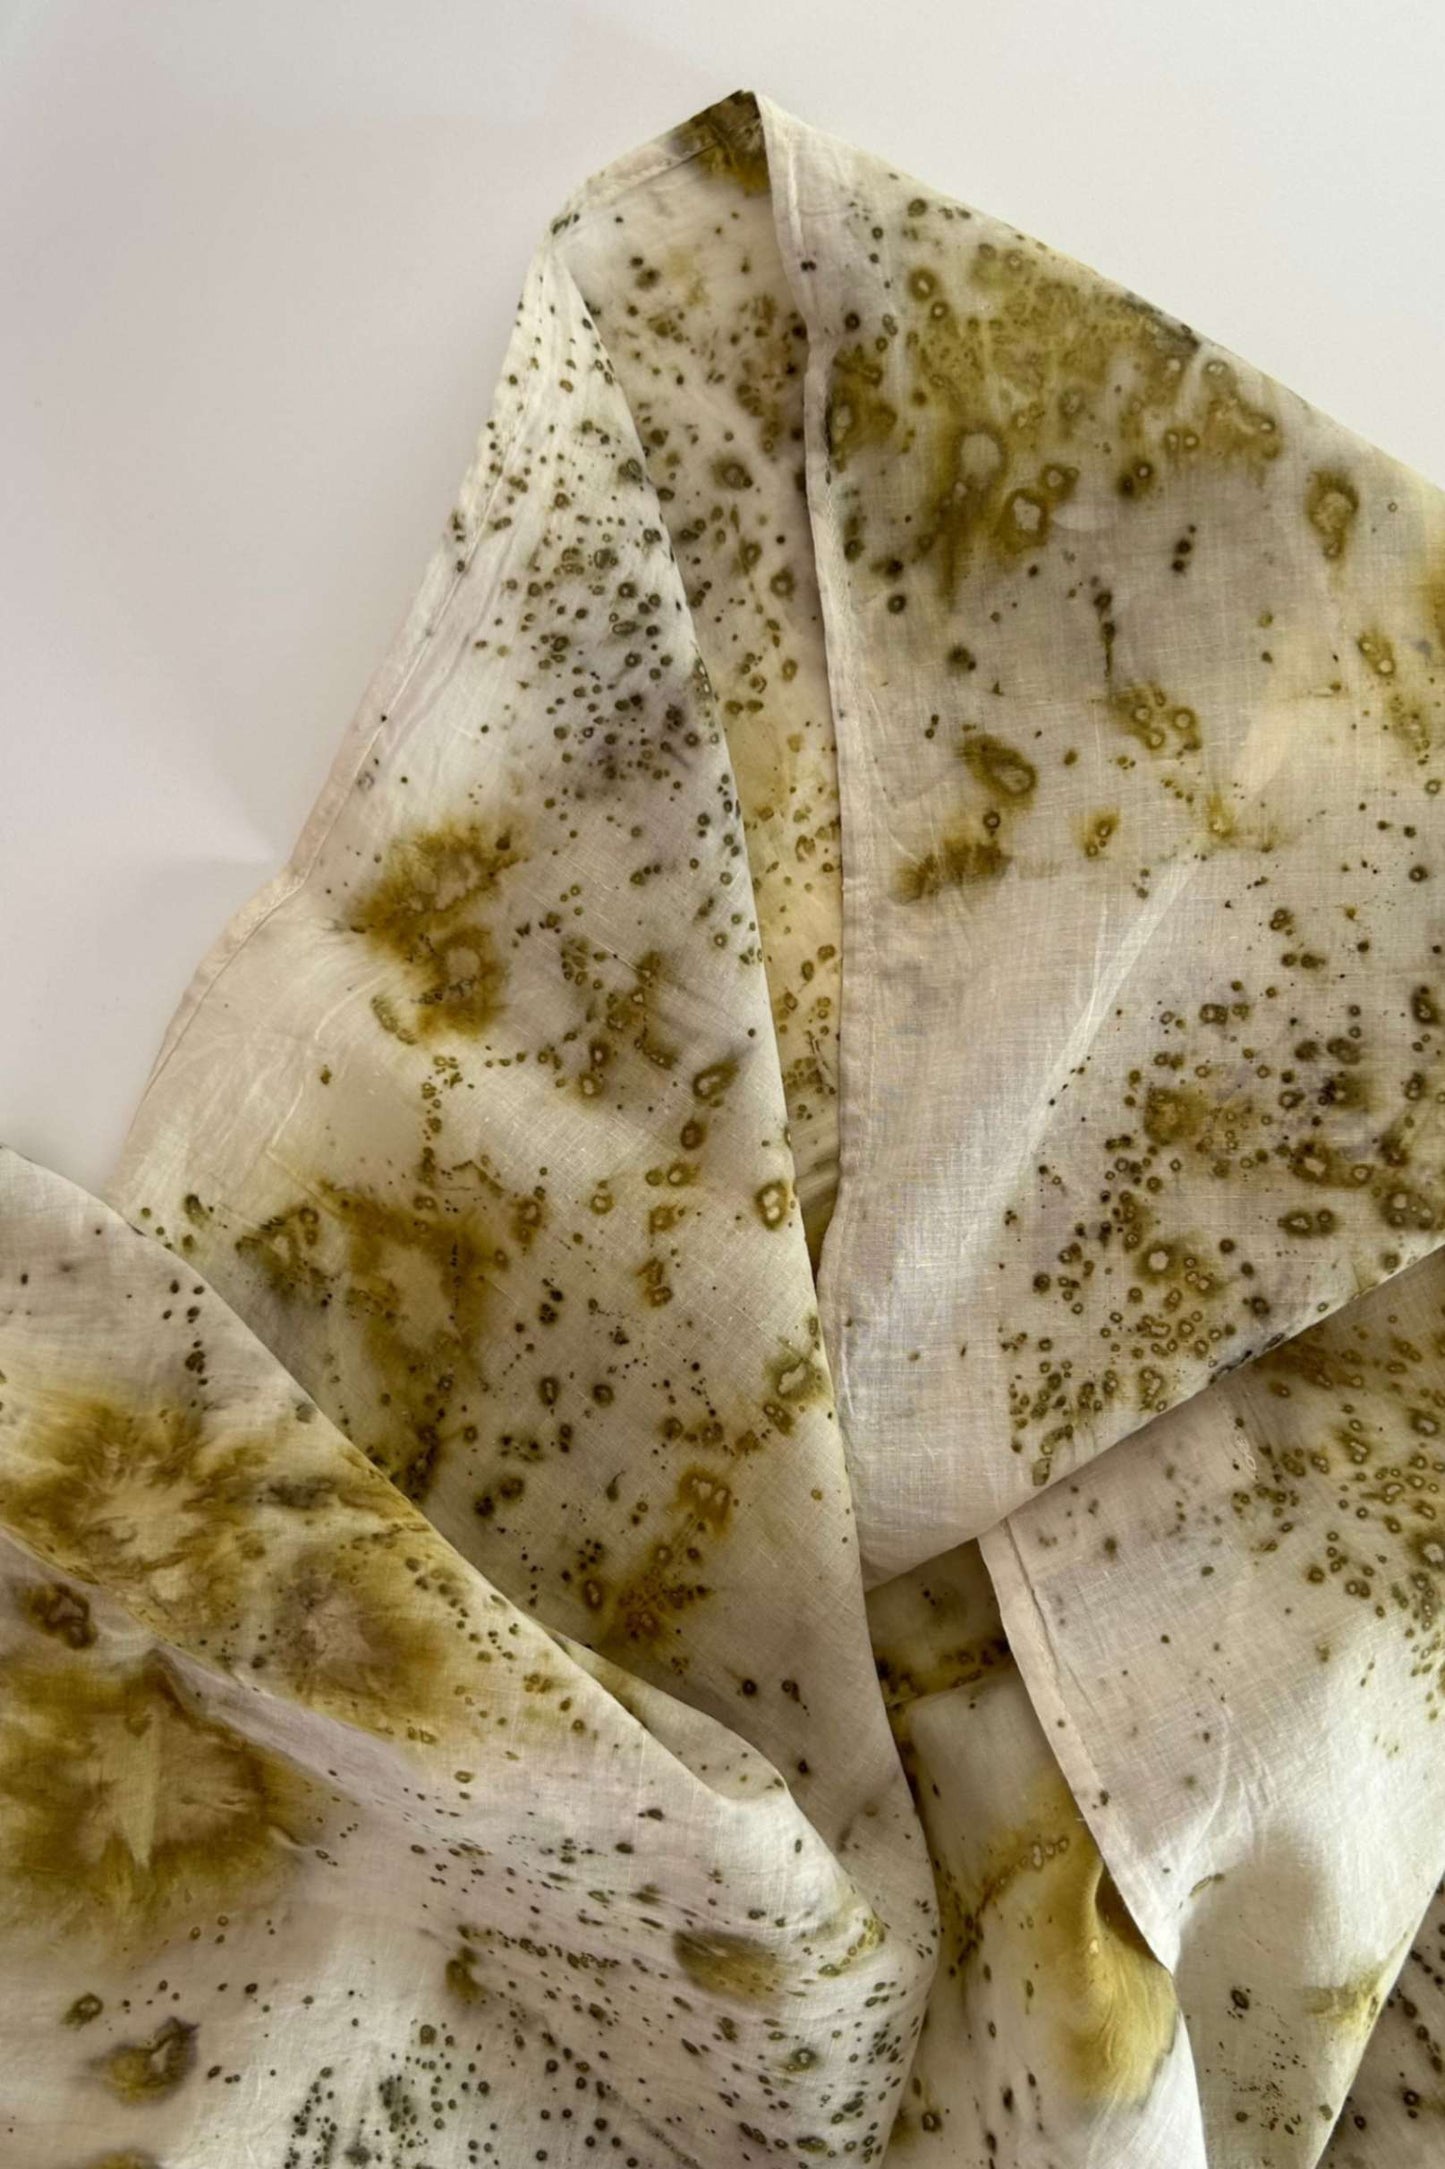 LOST IN FOREST - Khadi Cotton Scarf